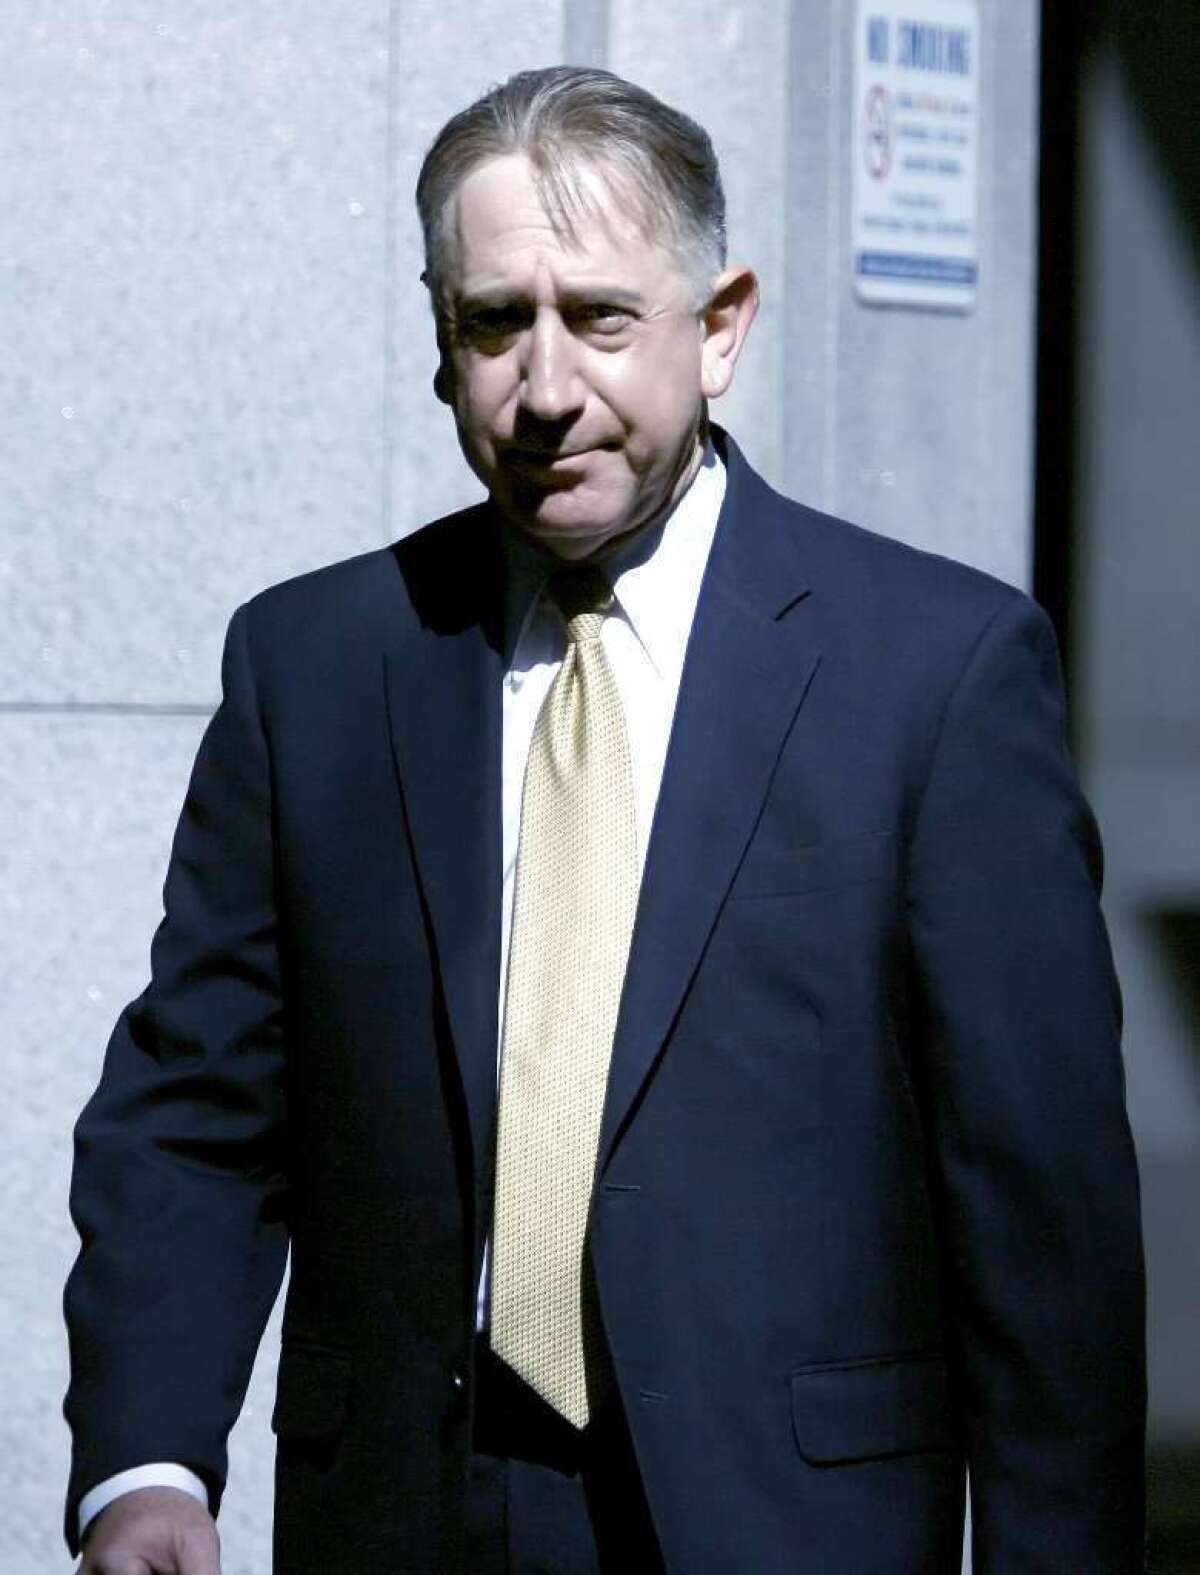 File photo: A Los Angeles County Superior Court judge delayed the trial of former Glendale City Councilman John Drayman until April.